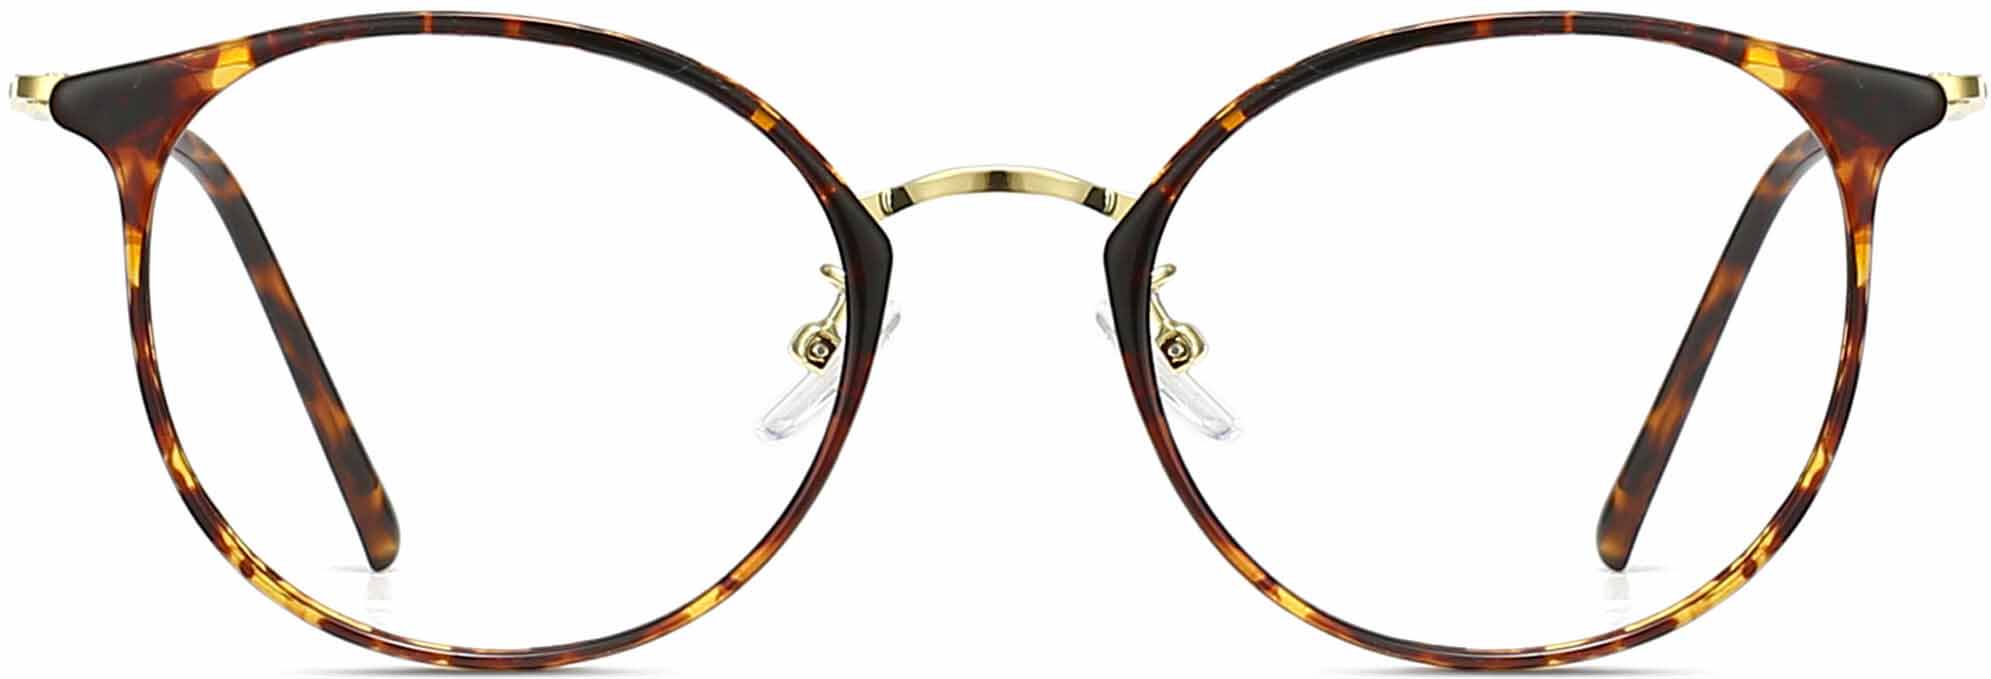 Harlow Round Tortoise Eyeglasses from ANRRI, front view